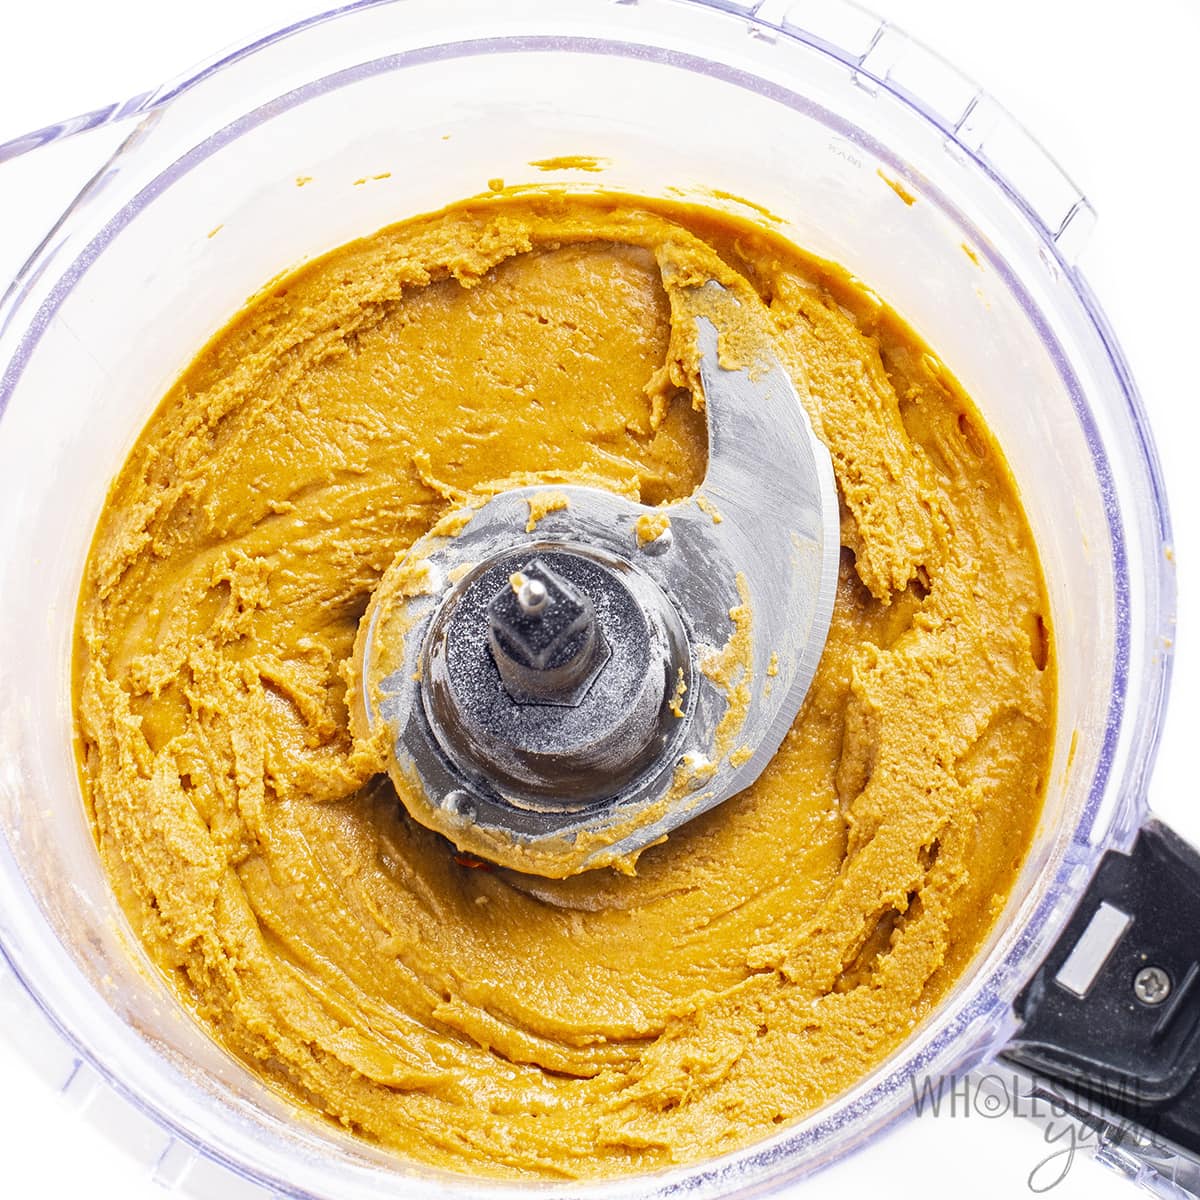 Peanut butter and other ingredients in a food processor.